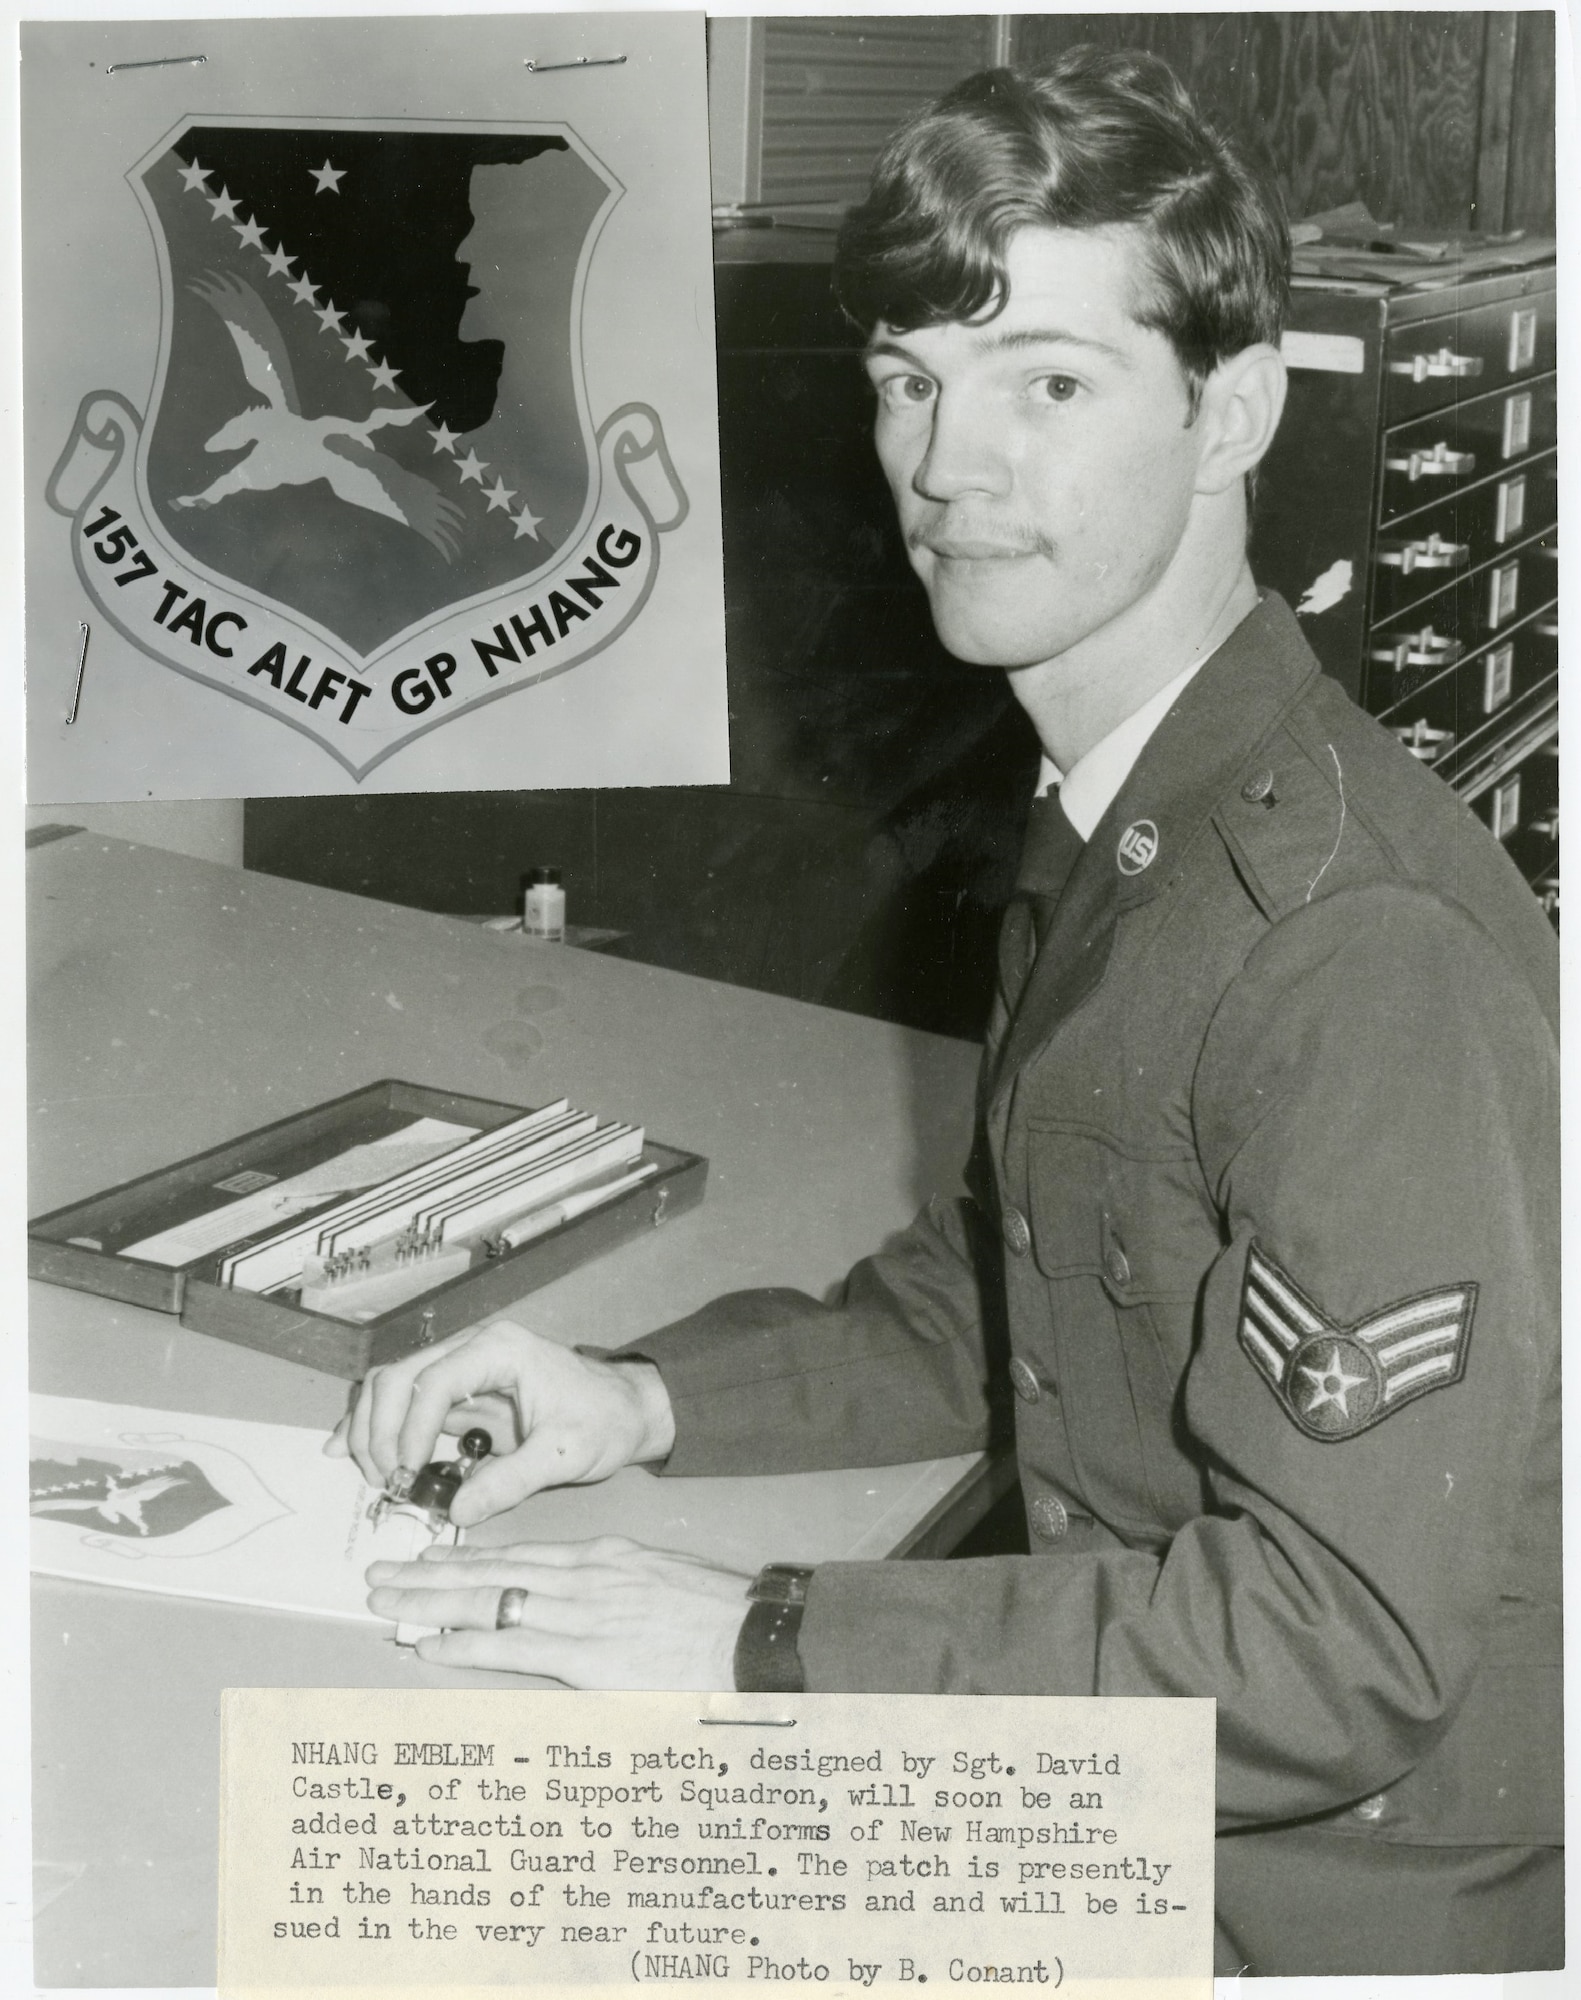 Sergeant David A. Castle of the Support Squadron designed the emblem for the 157th Tactical Airlift Group, New Hampshire Air National Guard.  The emblem became official on Aug. 23, 1972.  (U.S. Air National Guard photo by B. Conant) 